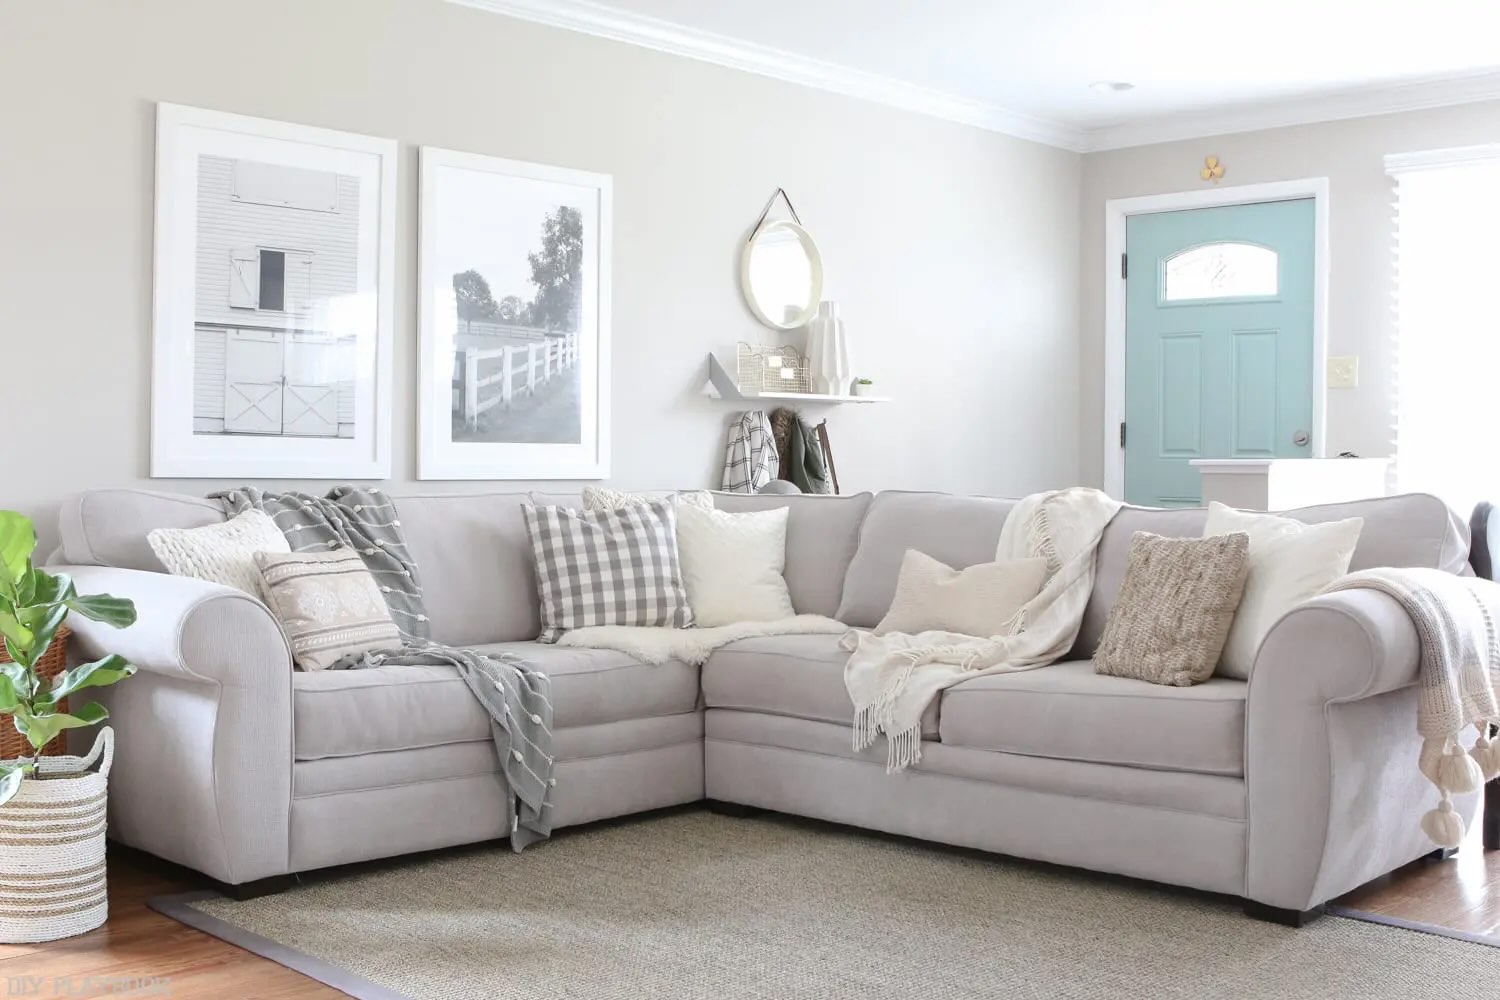 What Color Pillows Go With A Grey Couch 1698547752 